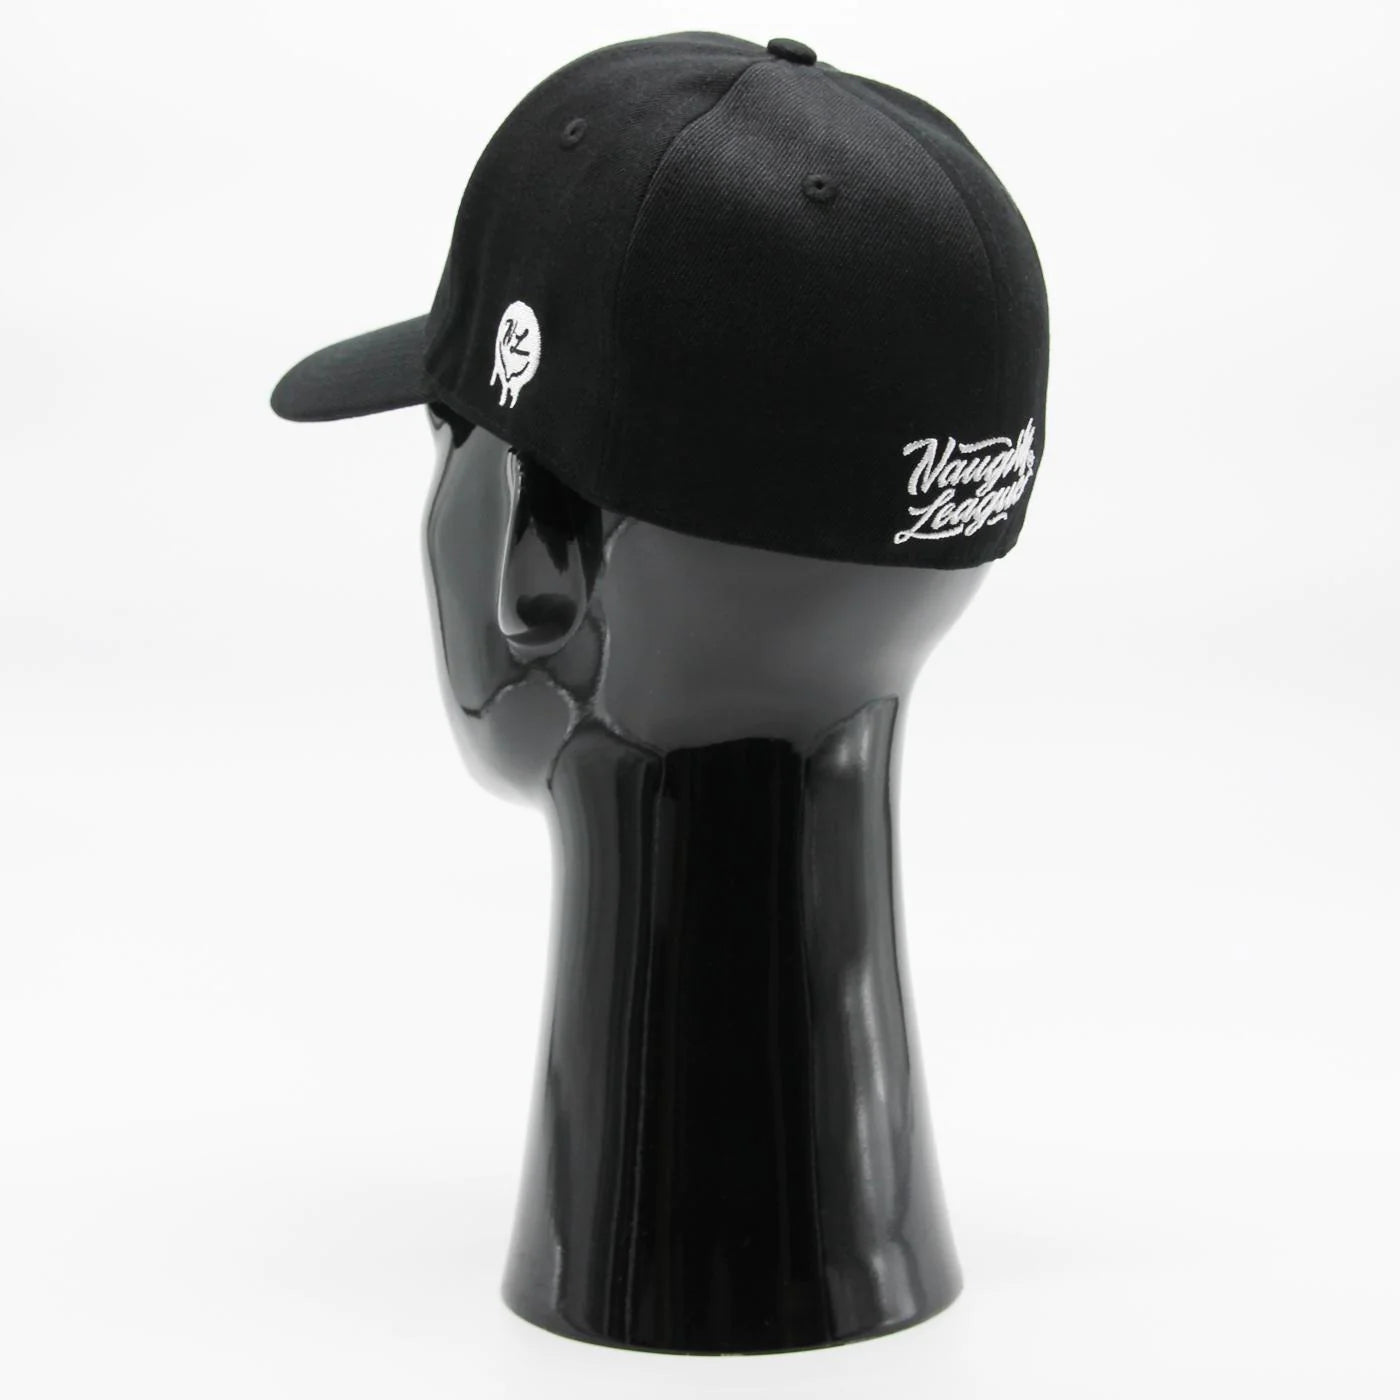 Branded Logo Curved Stretch Fitted Black/White